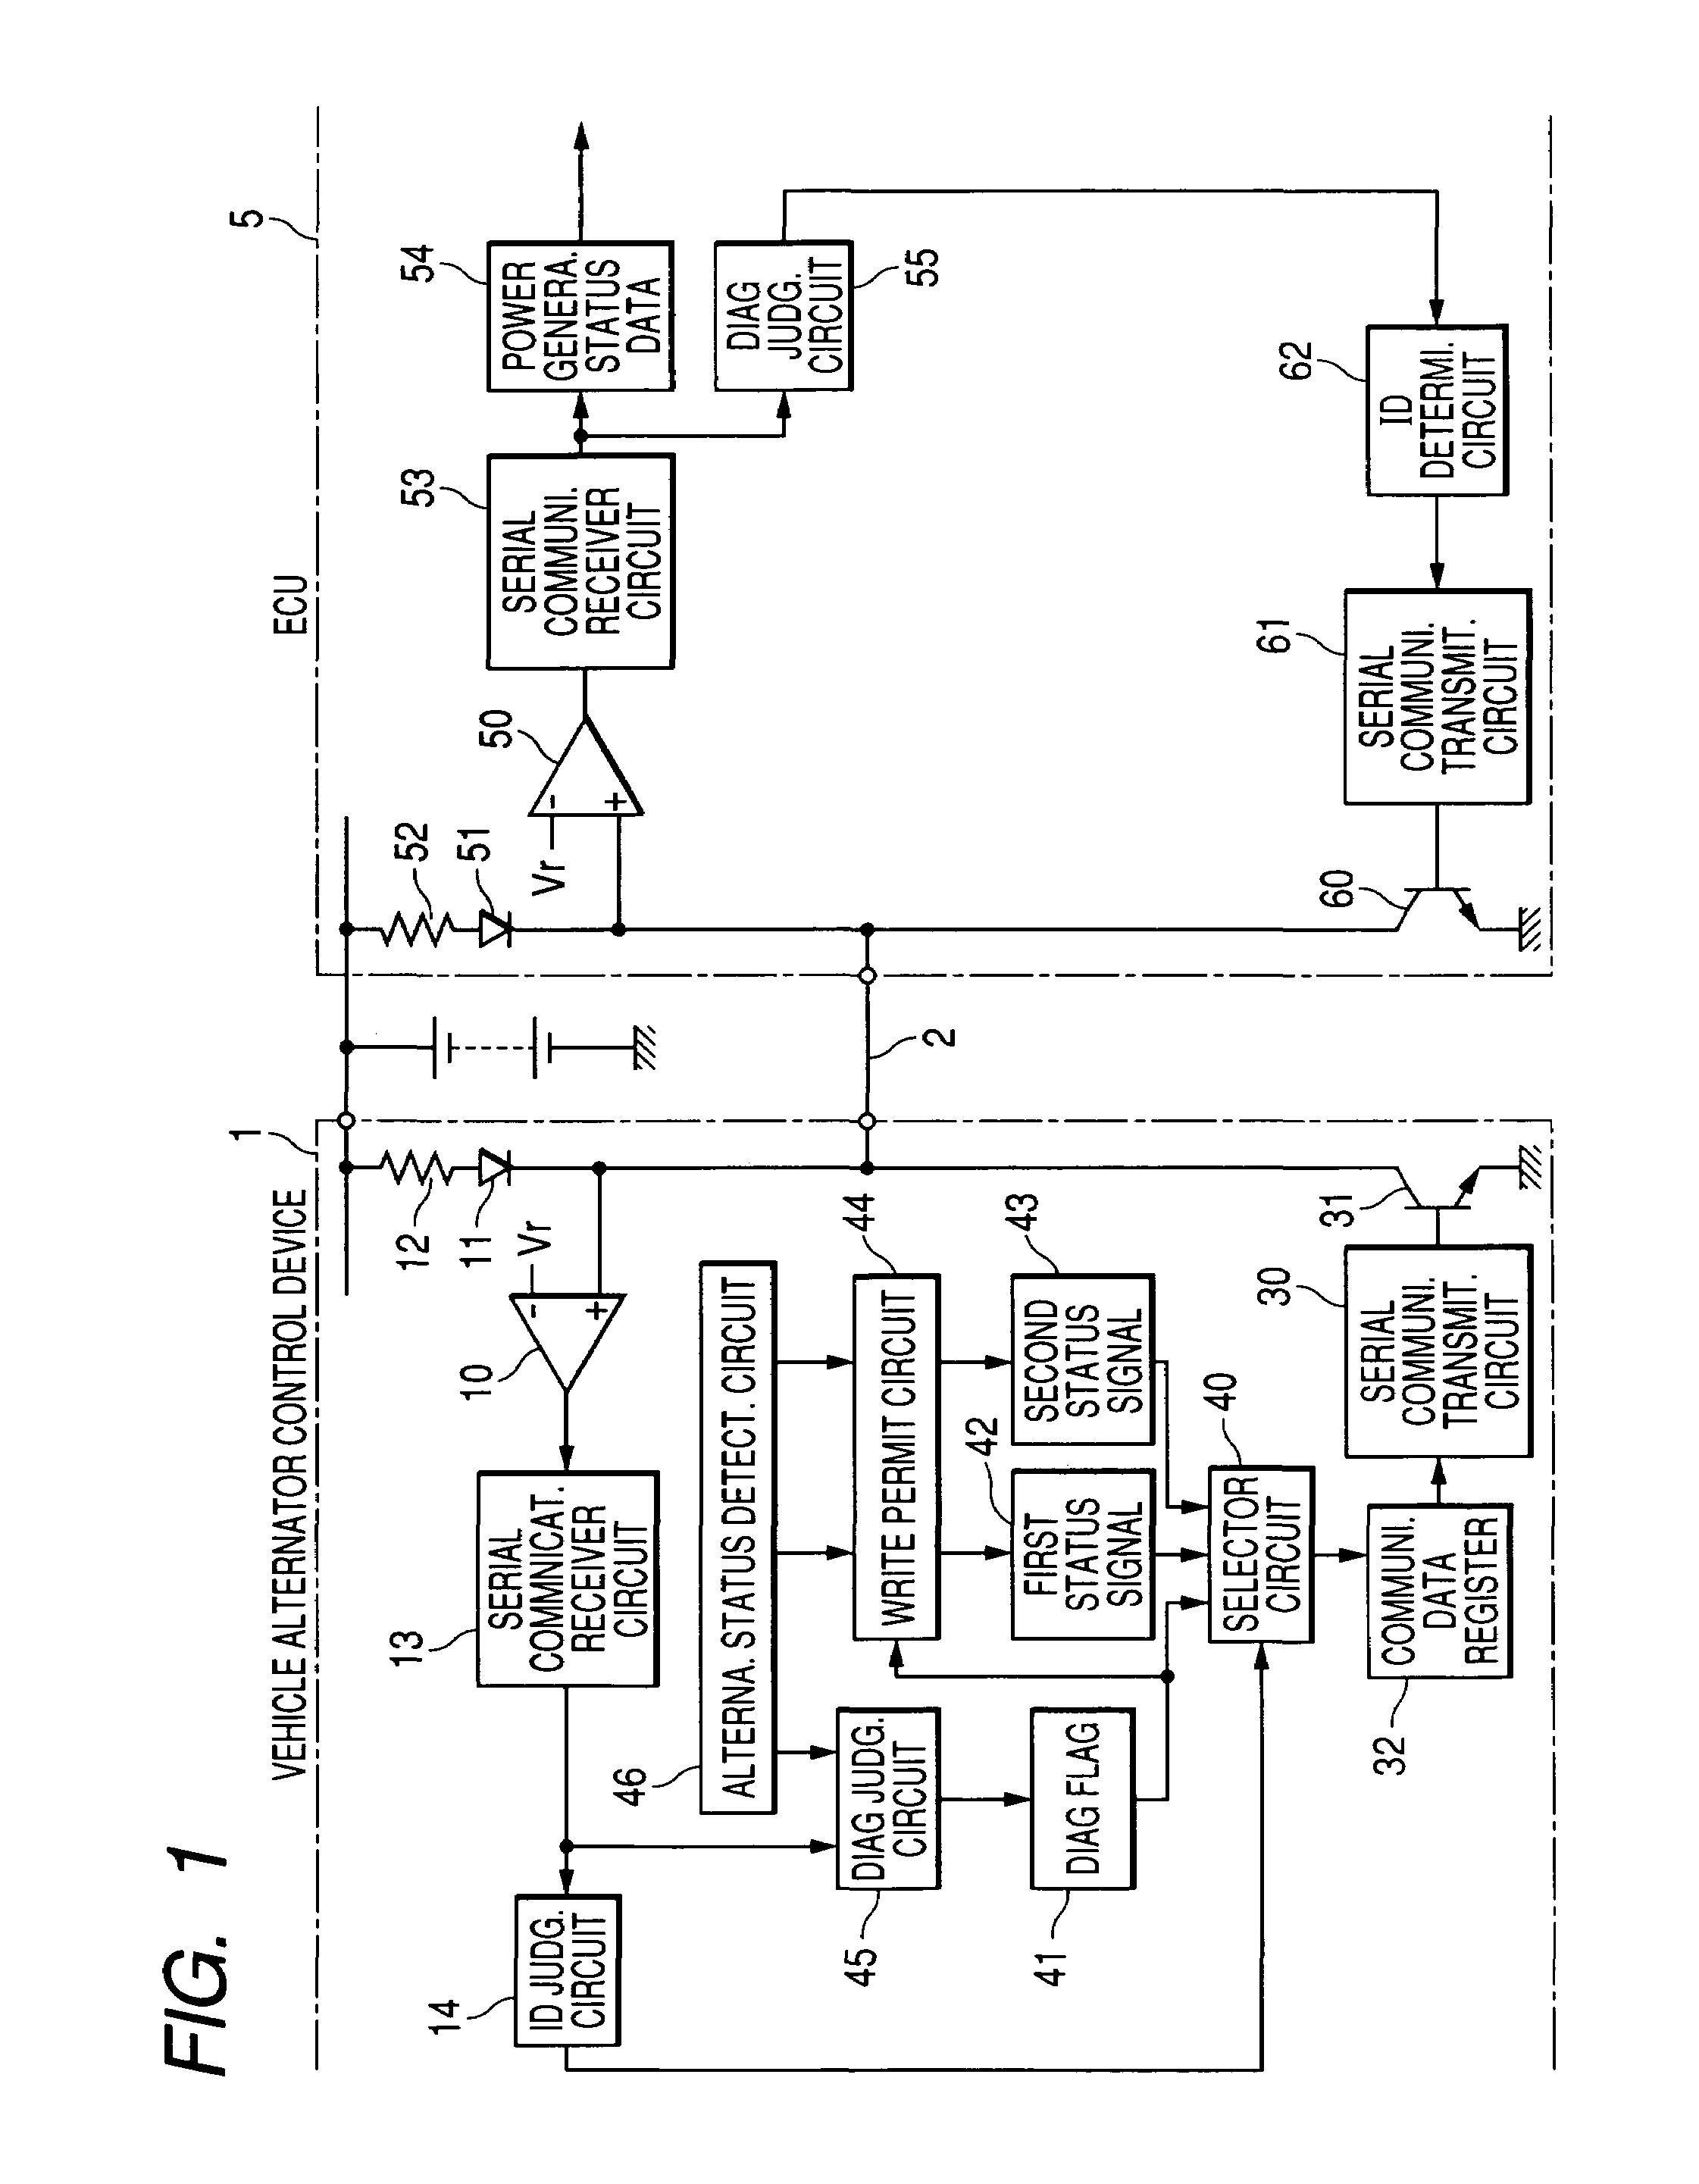 Vehicle alternator monitoring system and related failure monitoring method